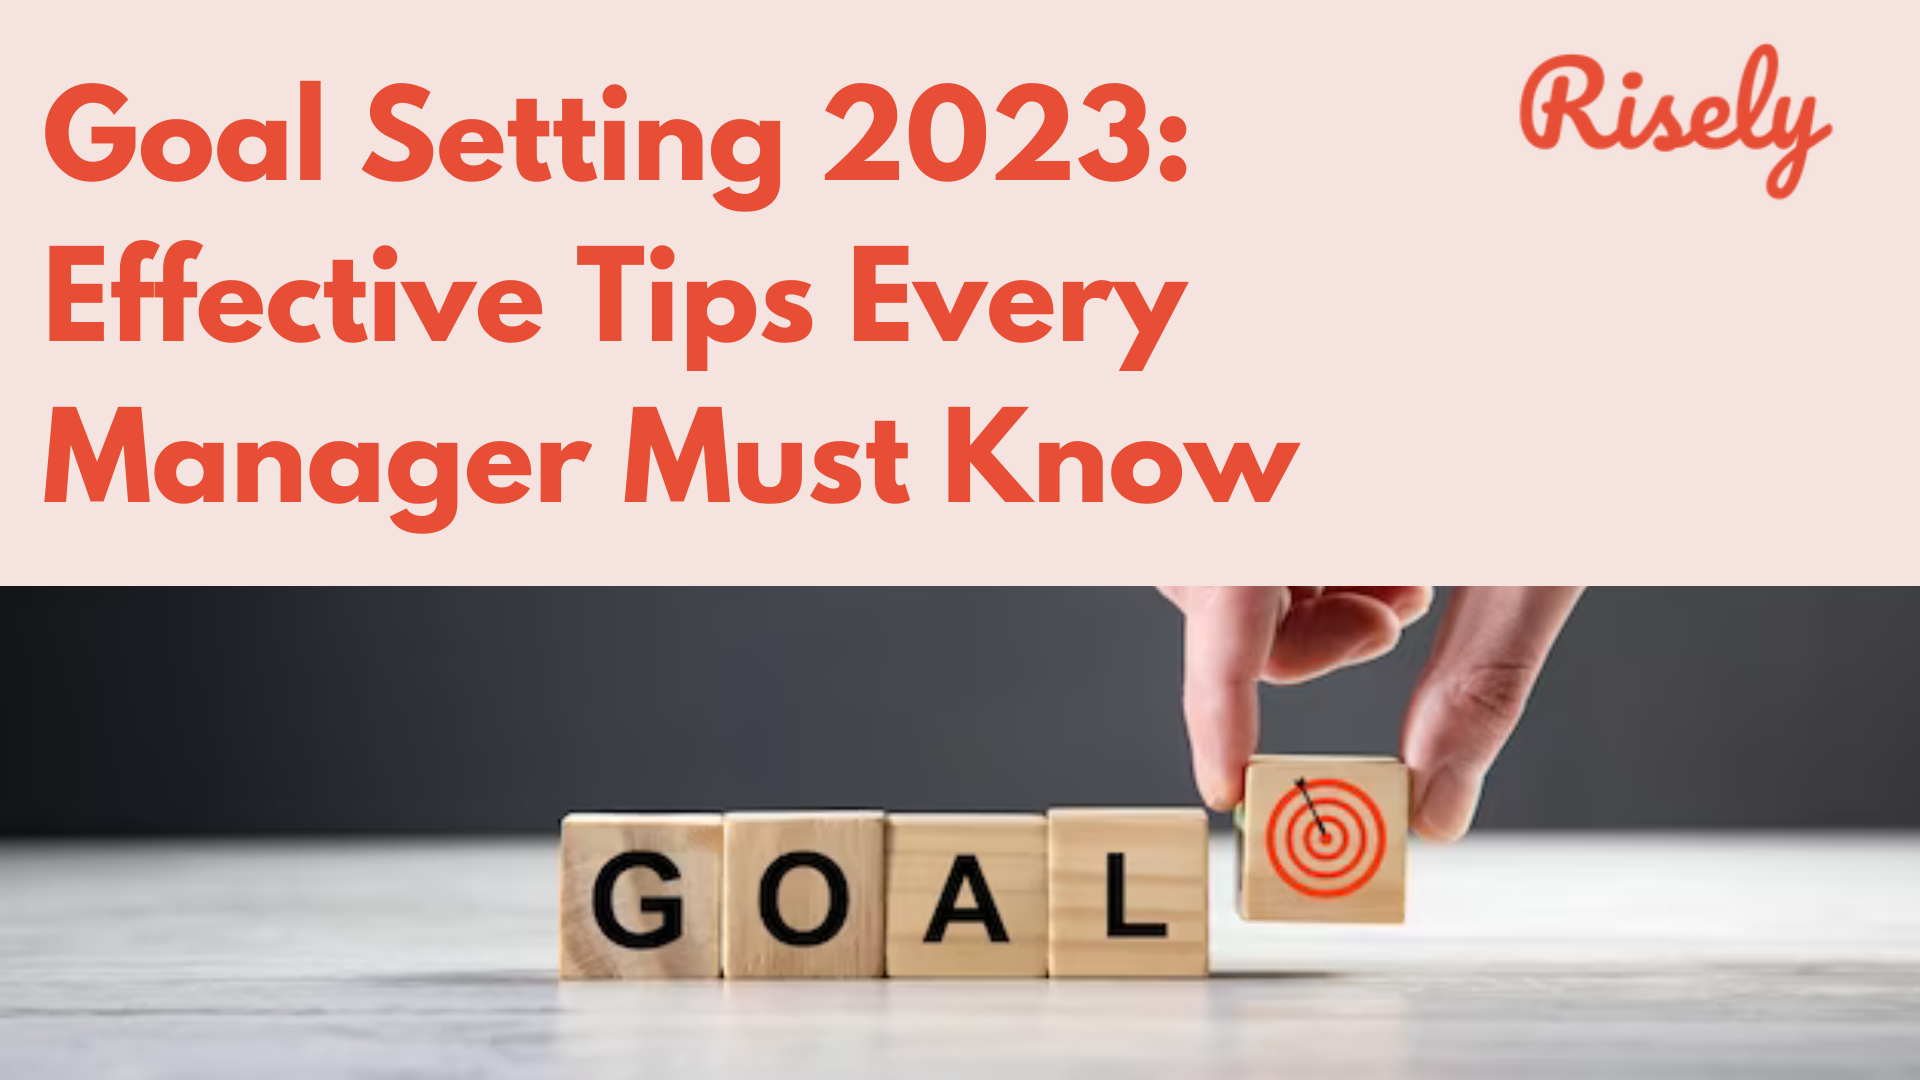 Goal Setting 2023: Effective Tips Every Manager Must Know